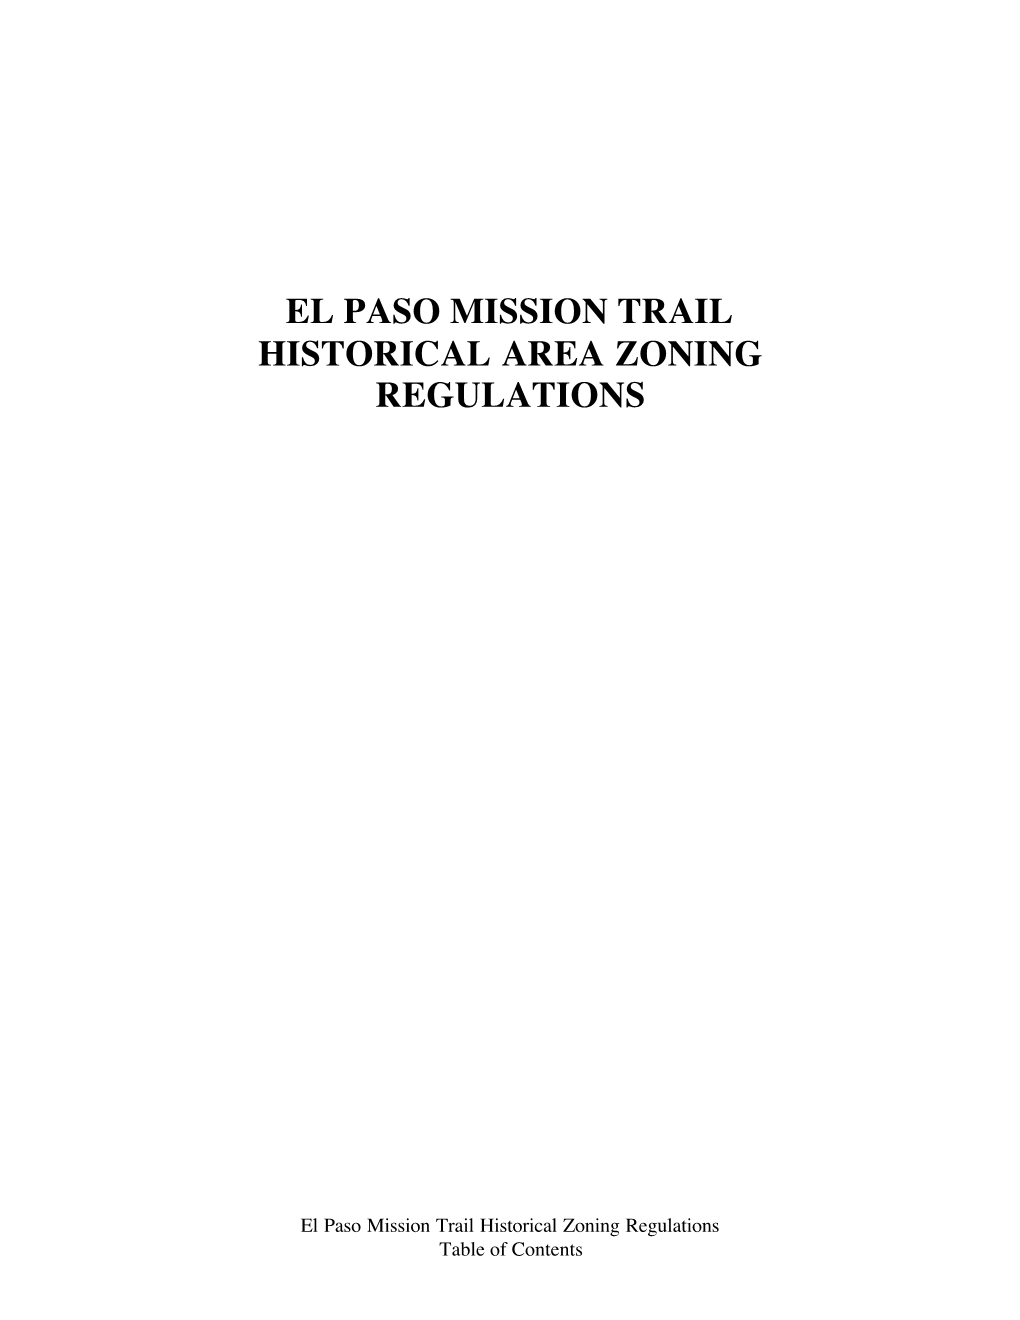 El Paso Mission Trail Historical Area Zoning Regulations